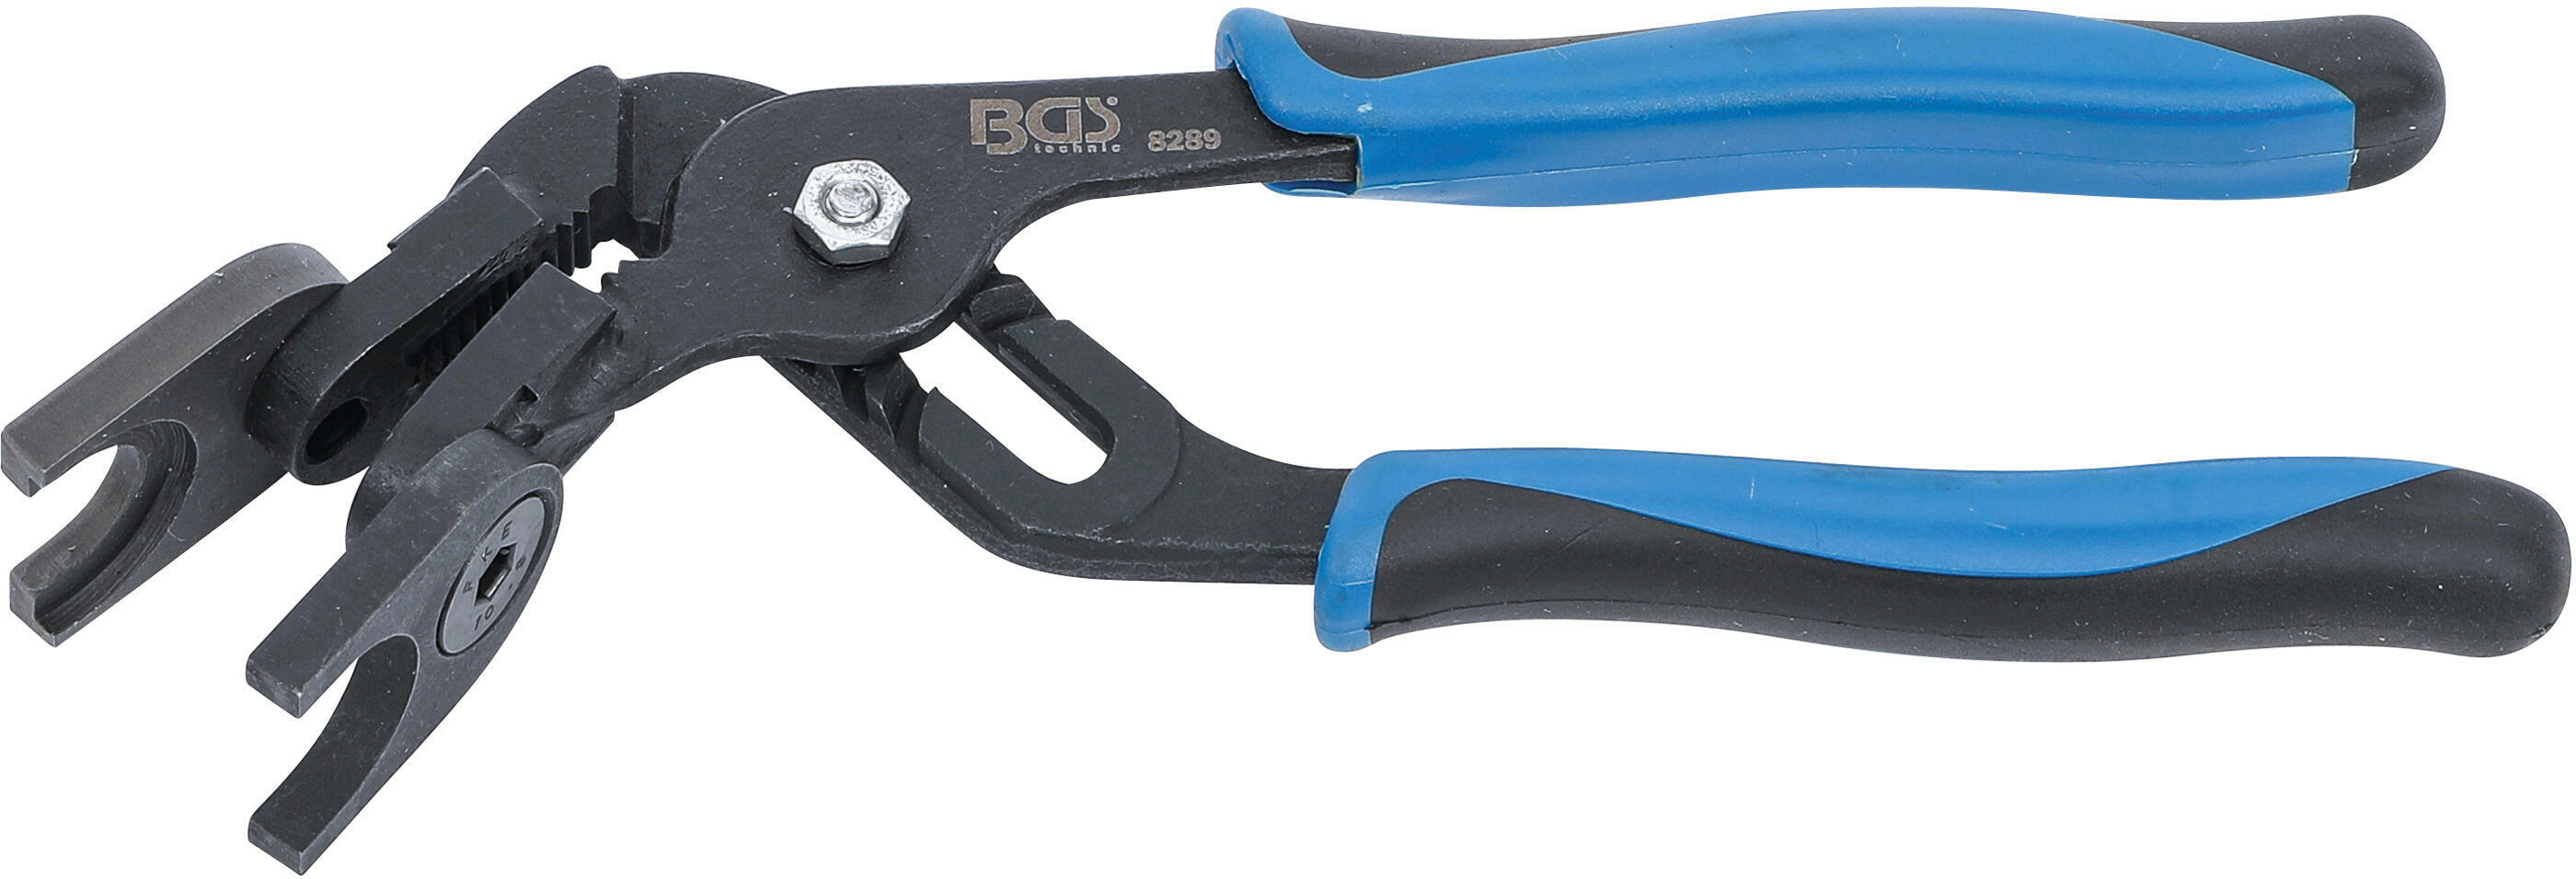 BGS Pipe Wrench